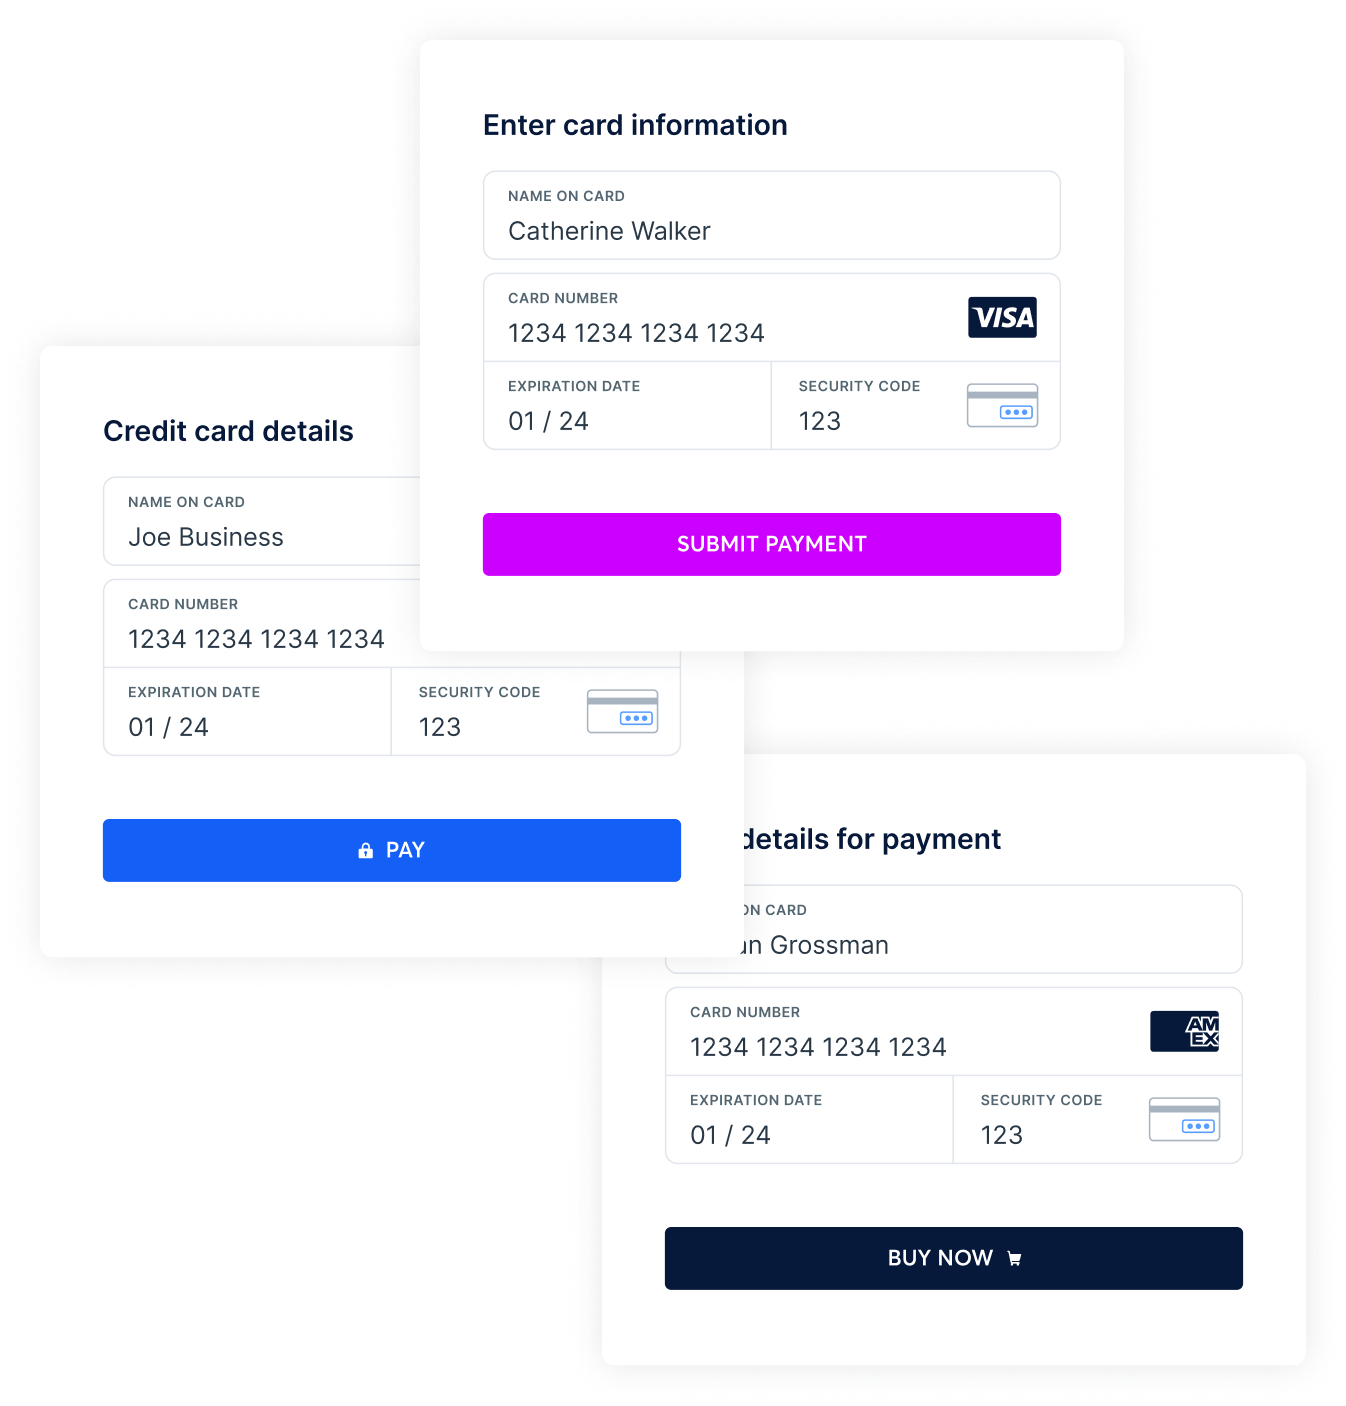 Examples of credit card forms with the details entered in the form fields.